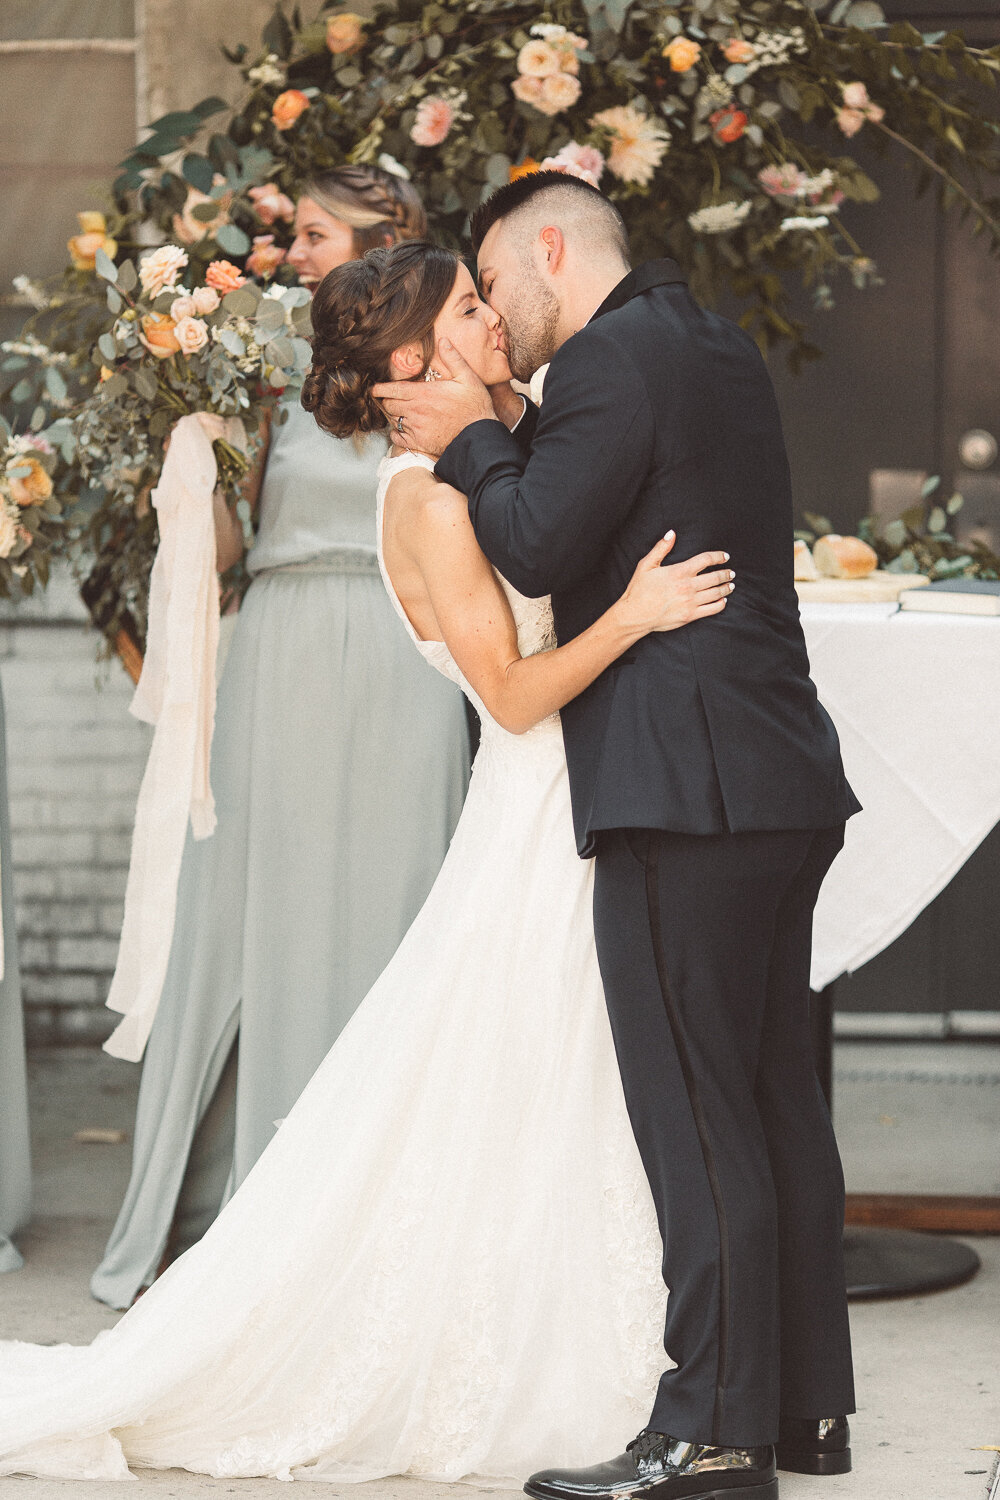 Kenzie and Nick' Wedding featuring a custom Renee Grace Bridal gown